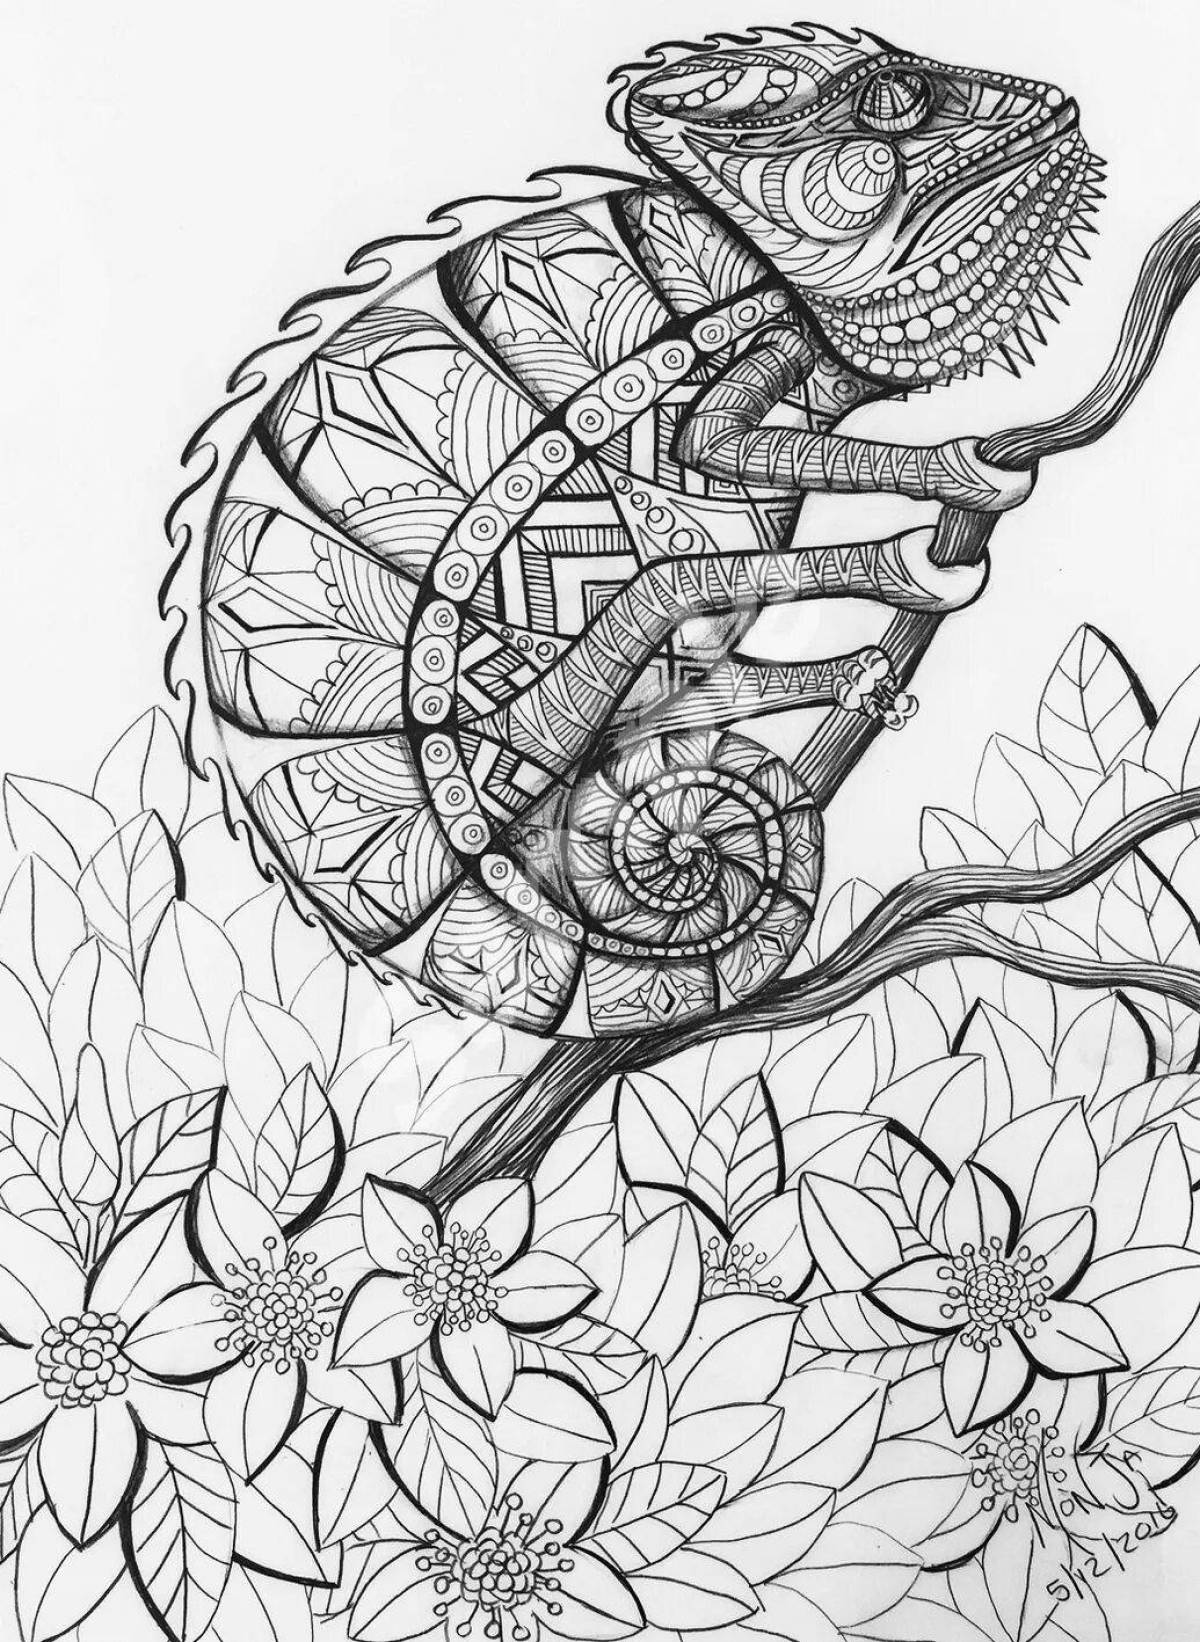 Exciting anti-stress chameleon coloring book